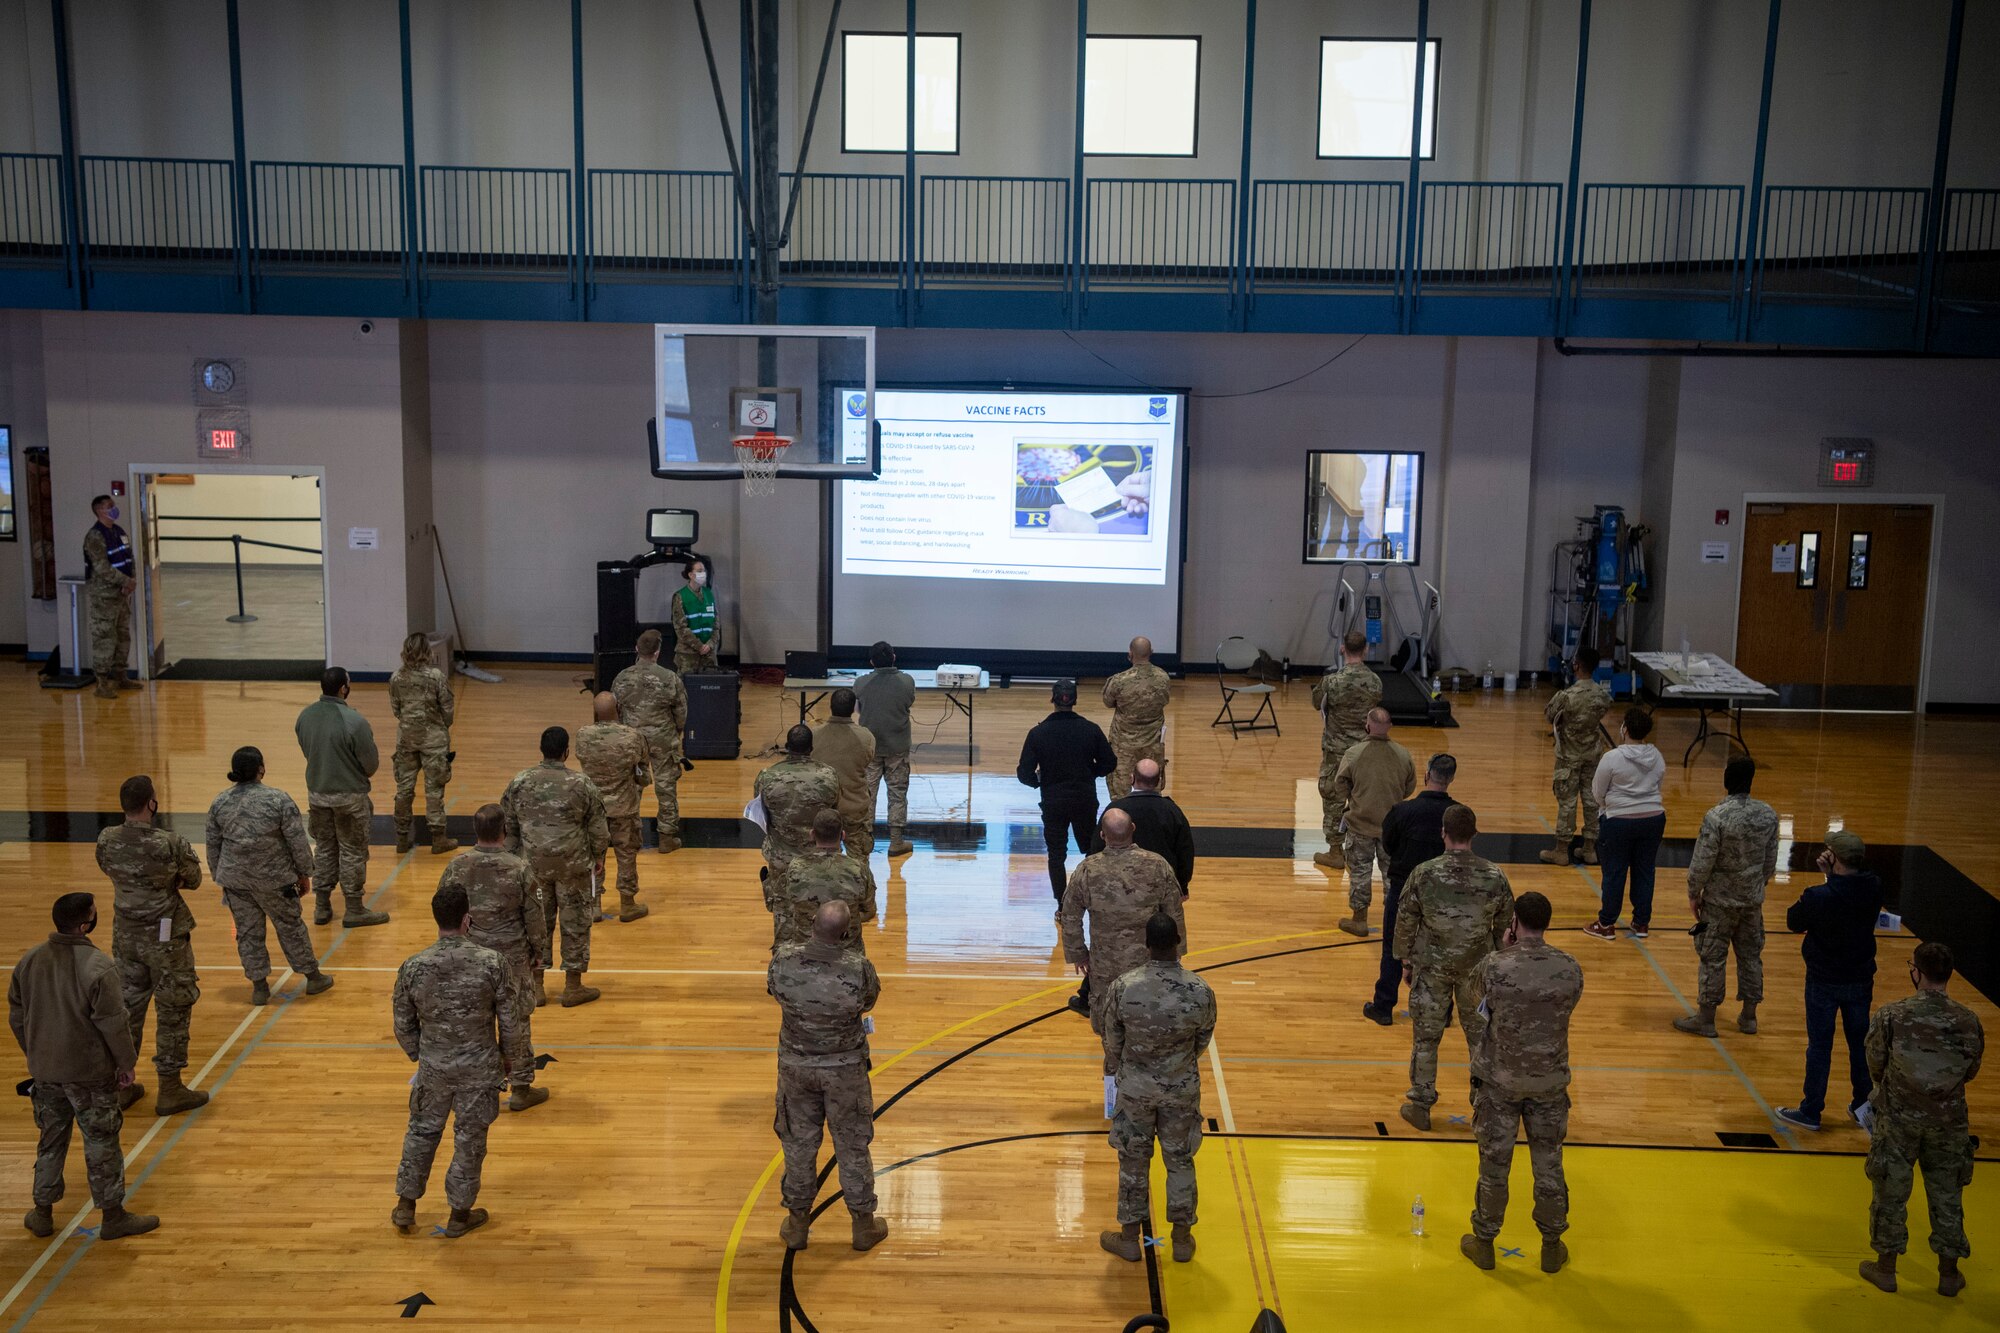 Airmen stand in the gym prior to getting a COVID-19 vaccine.